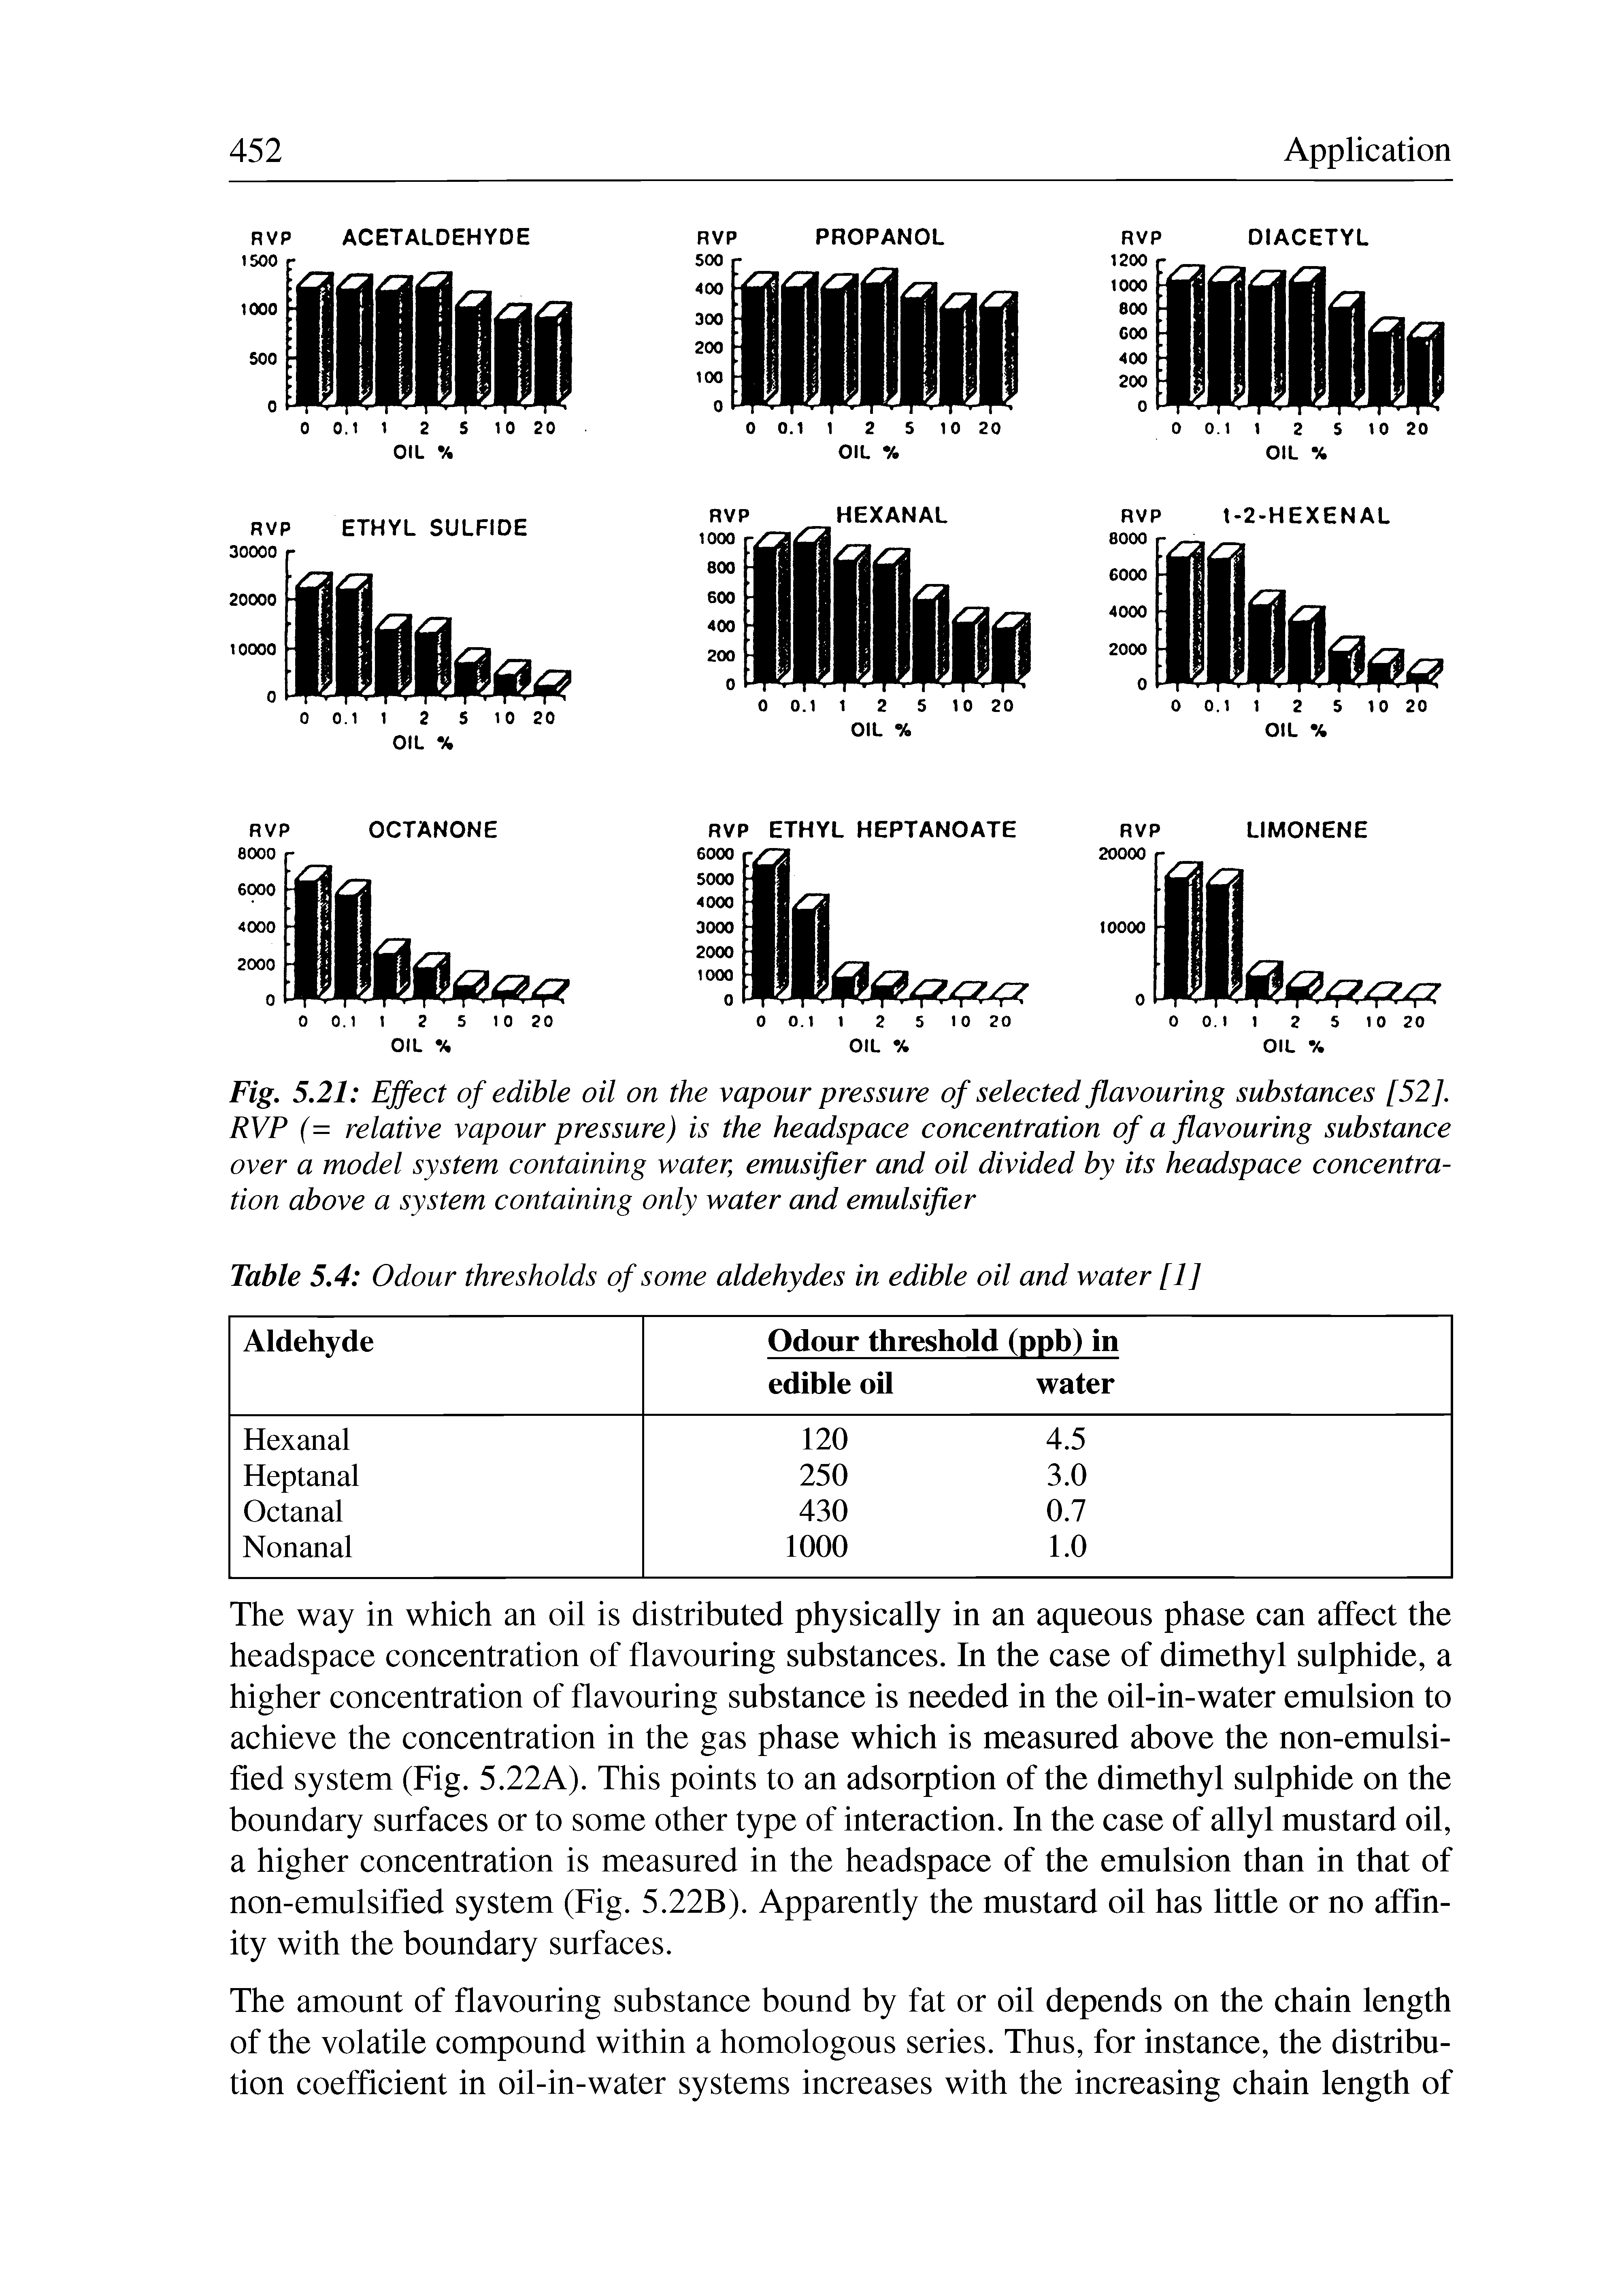 Fig. 5.21 Effect of edible oil on the vapour pressure of selected flavouring substances [52]. RVP (= relative vapour pressure) is the headspace concentration of a flavouring substance over a model system containing water, emusifier and oil divided by its headspace concentration above a system containing only water and emulsifier...